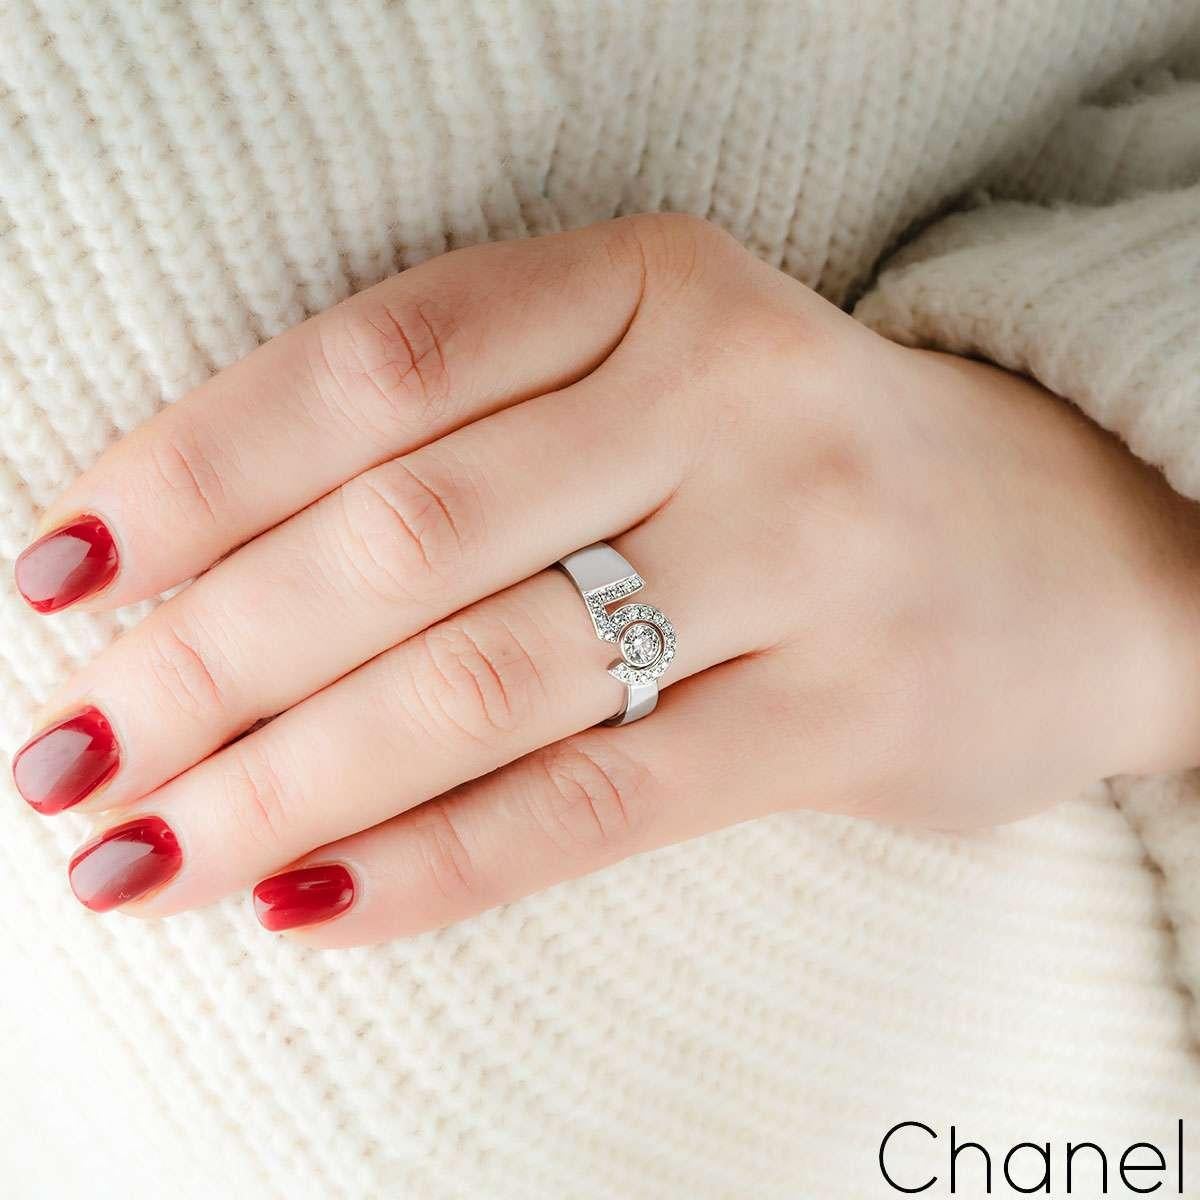 Round Cut Chanel White Gold Diamond Eternal No.5 Ring Size 55 J12002 For Sale